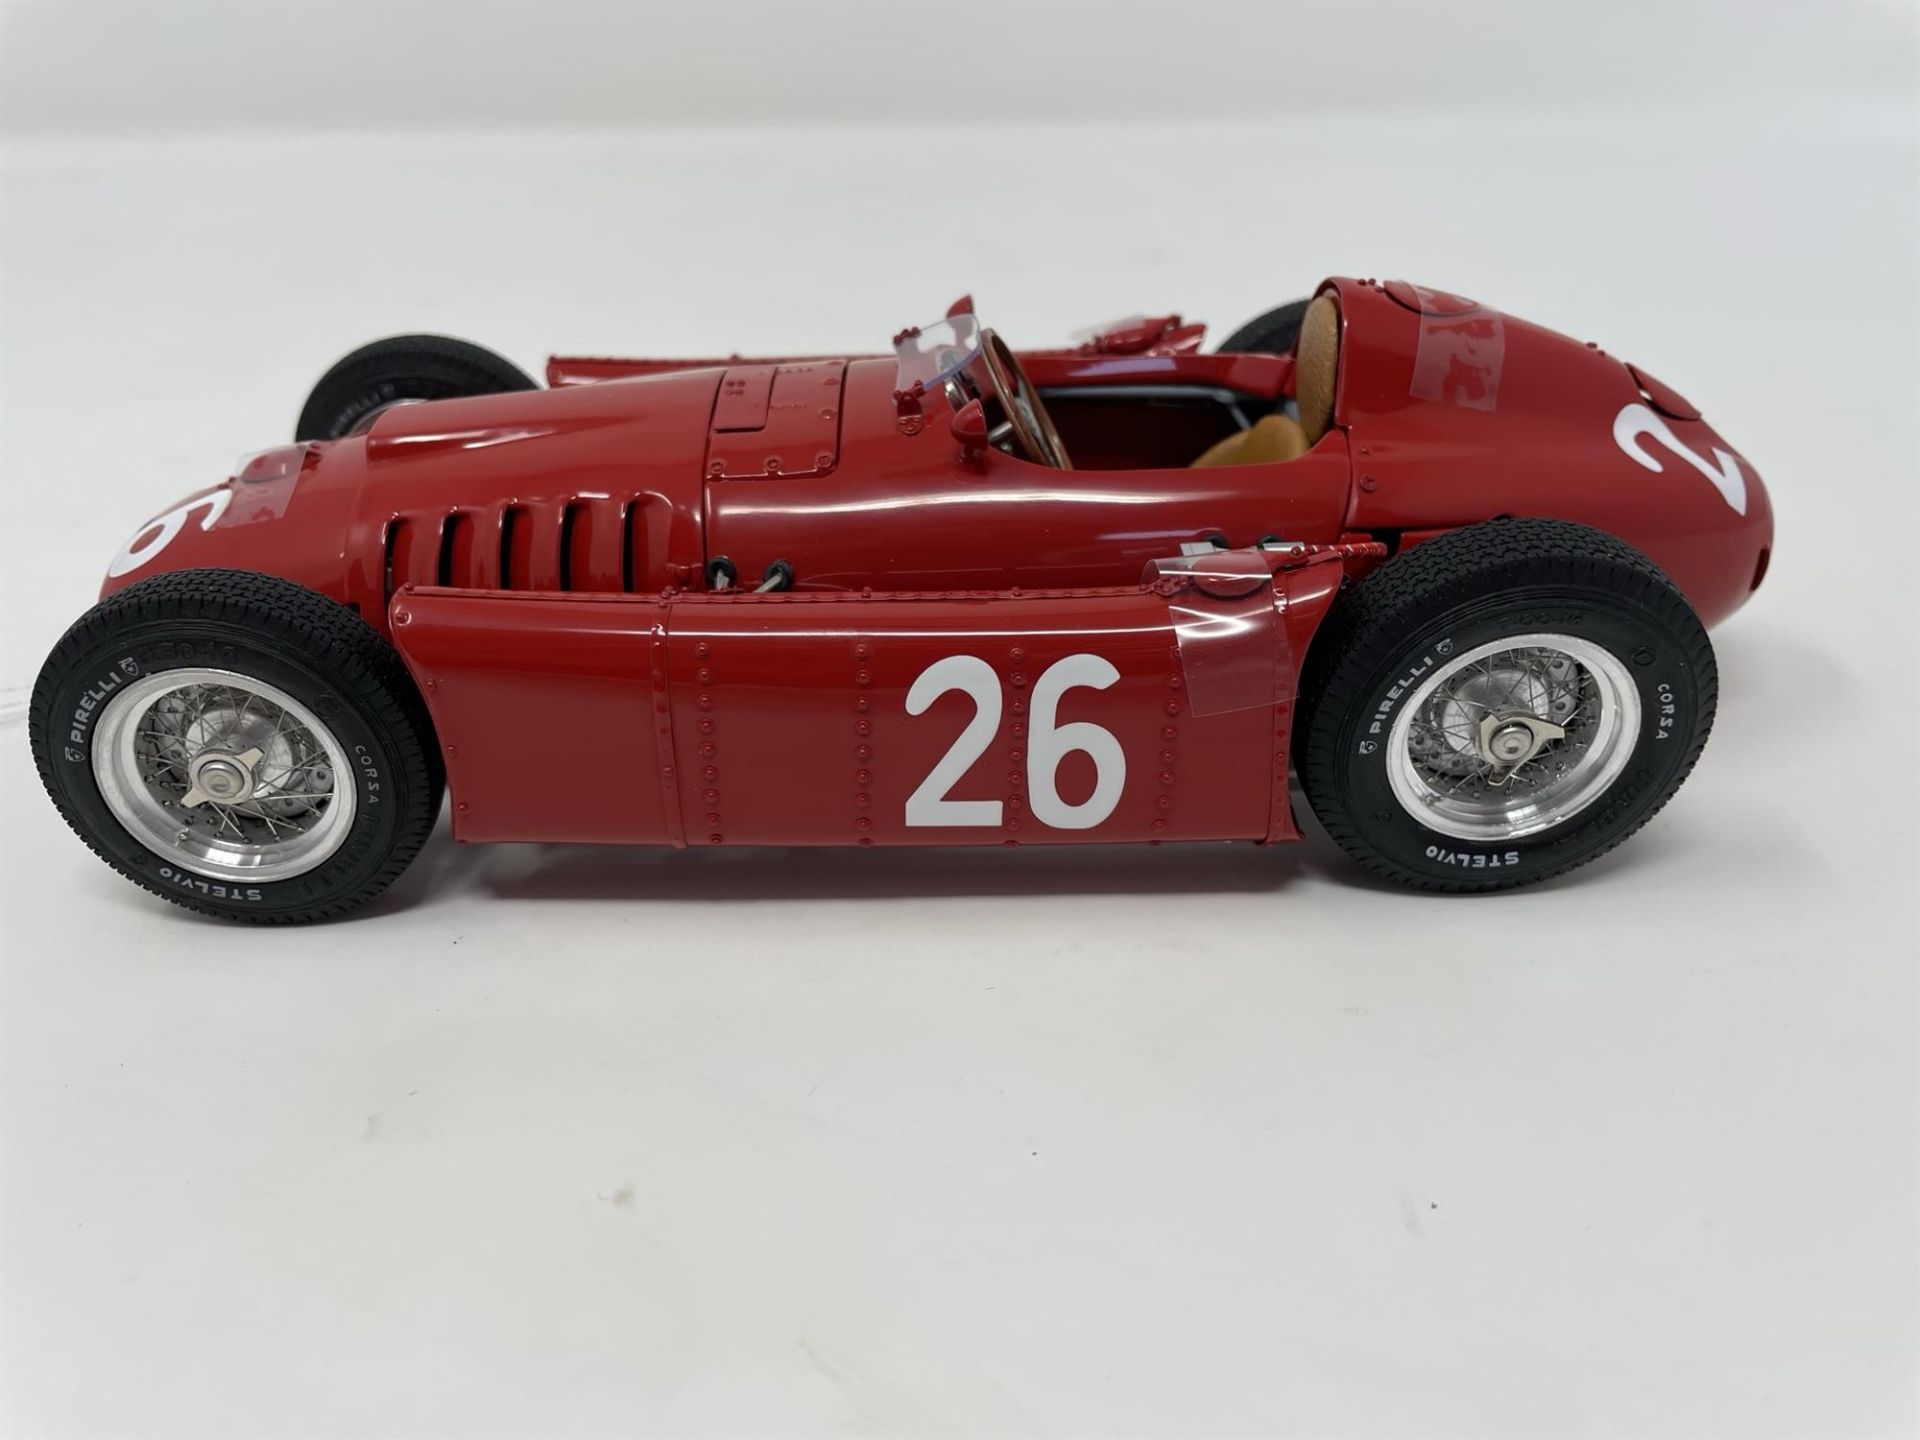 Lancia D50 1:18th Scale CMC Scale Model - Image 10 of 10